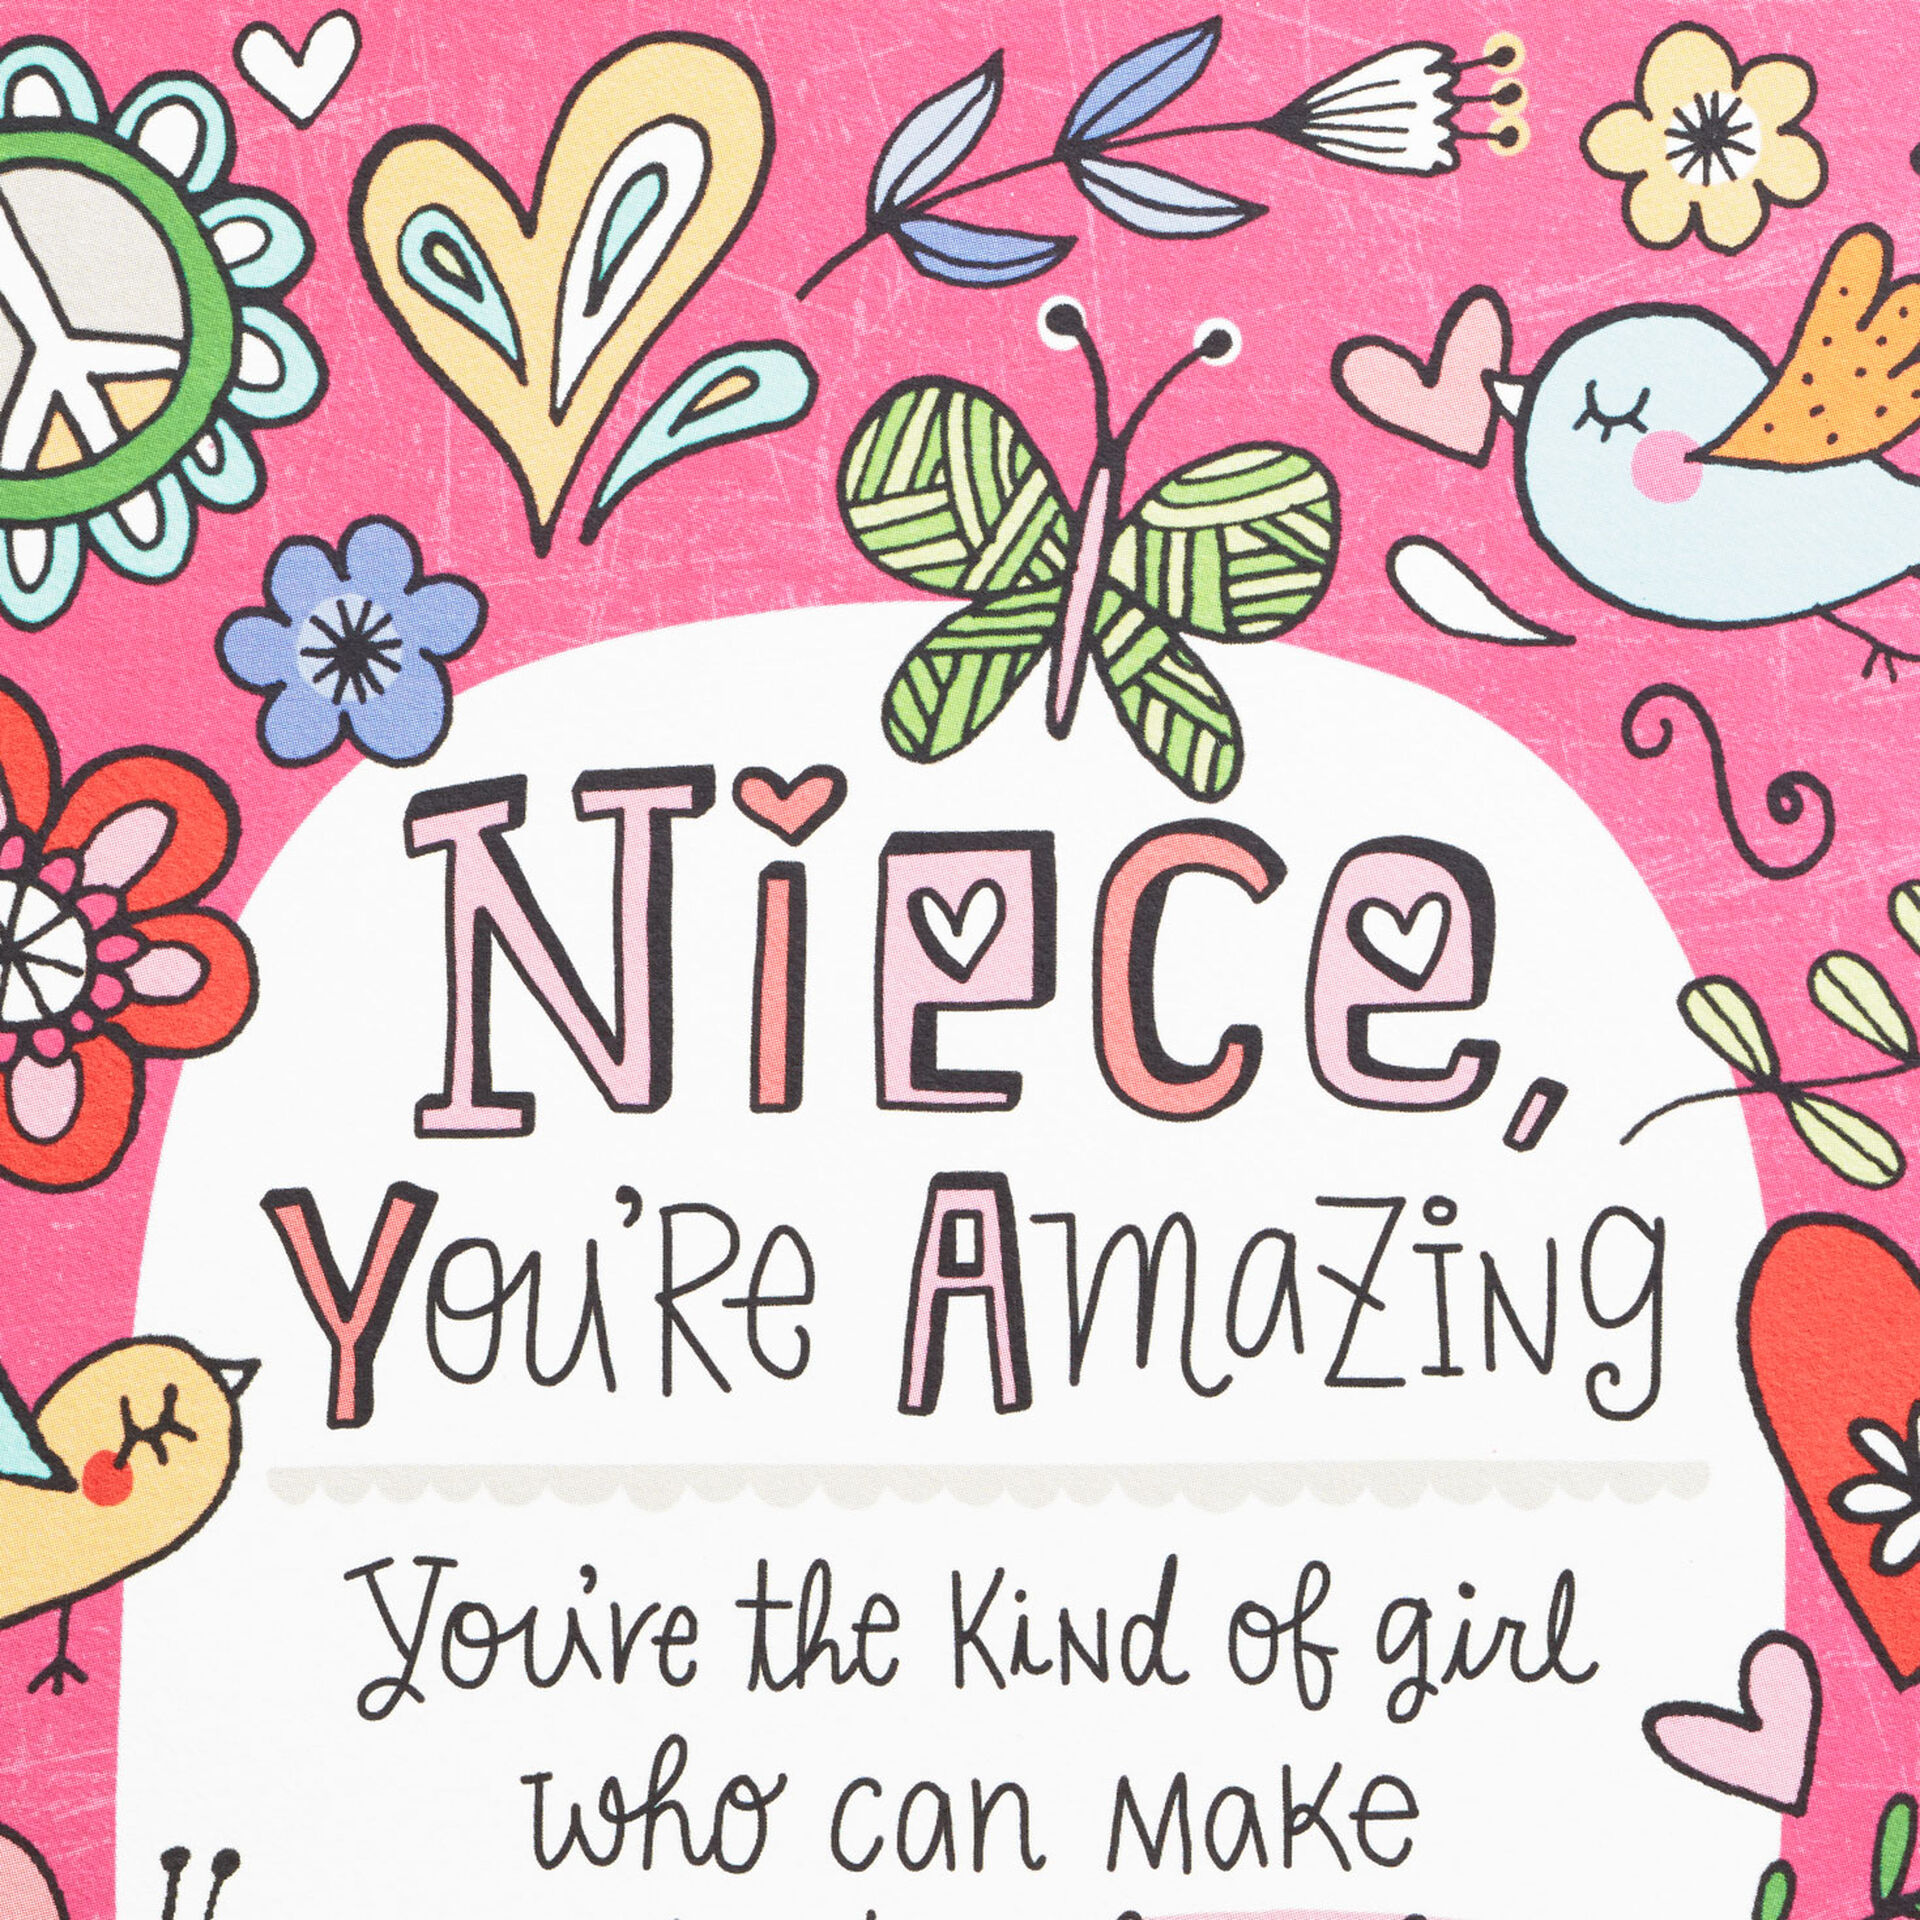 22 Ideas For Niece Birthday Cards Home Family Style And Art Ideas 